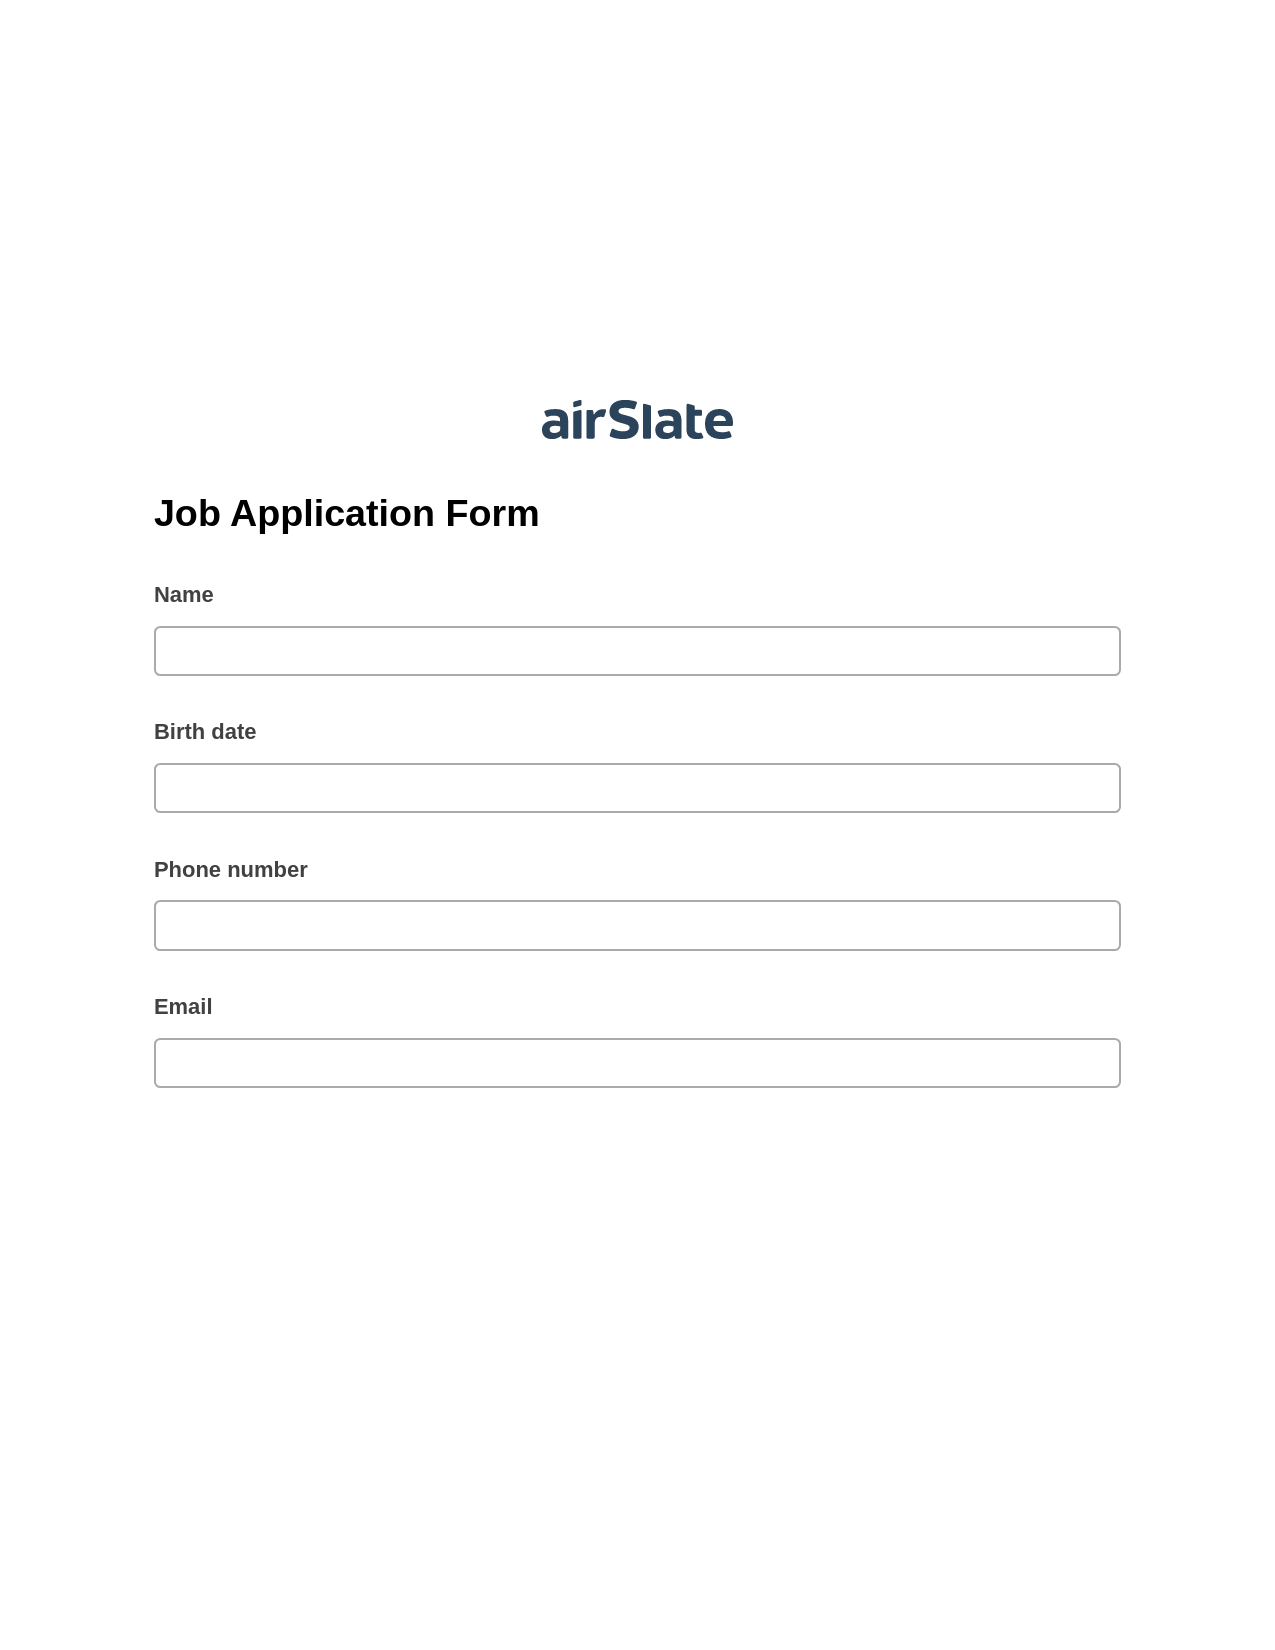 Multirole Job Application Form Pre-fill Slate from MS Dynamics 365 Records Bot, Roles Reminder Bot, Export to MySQL Bot